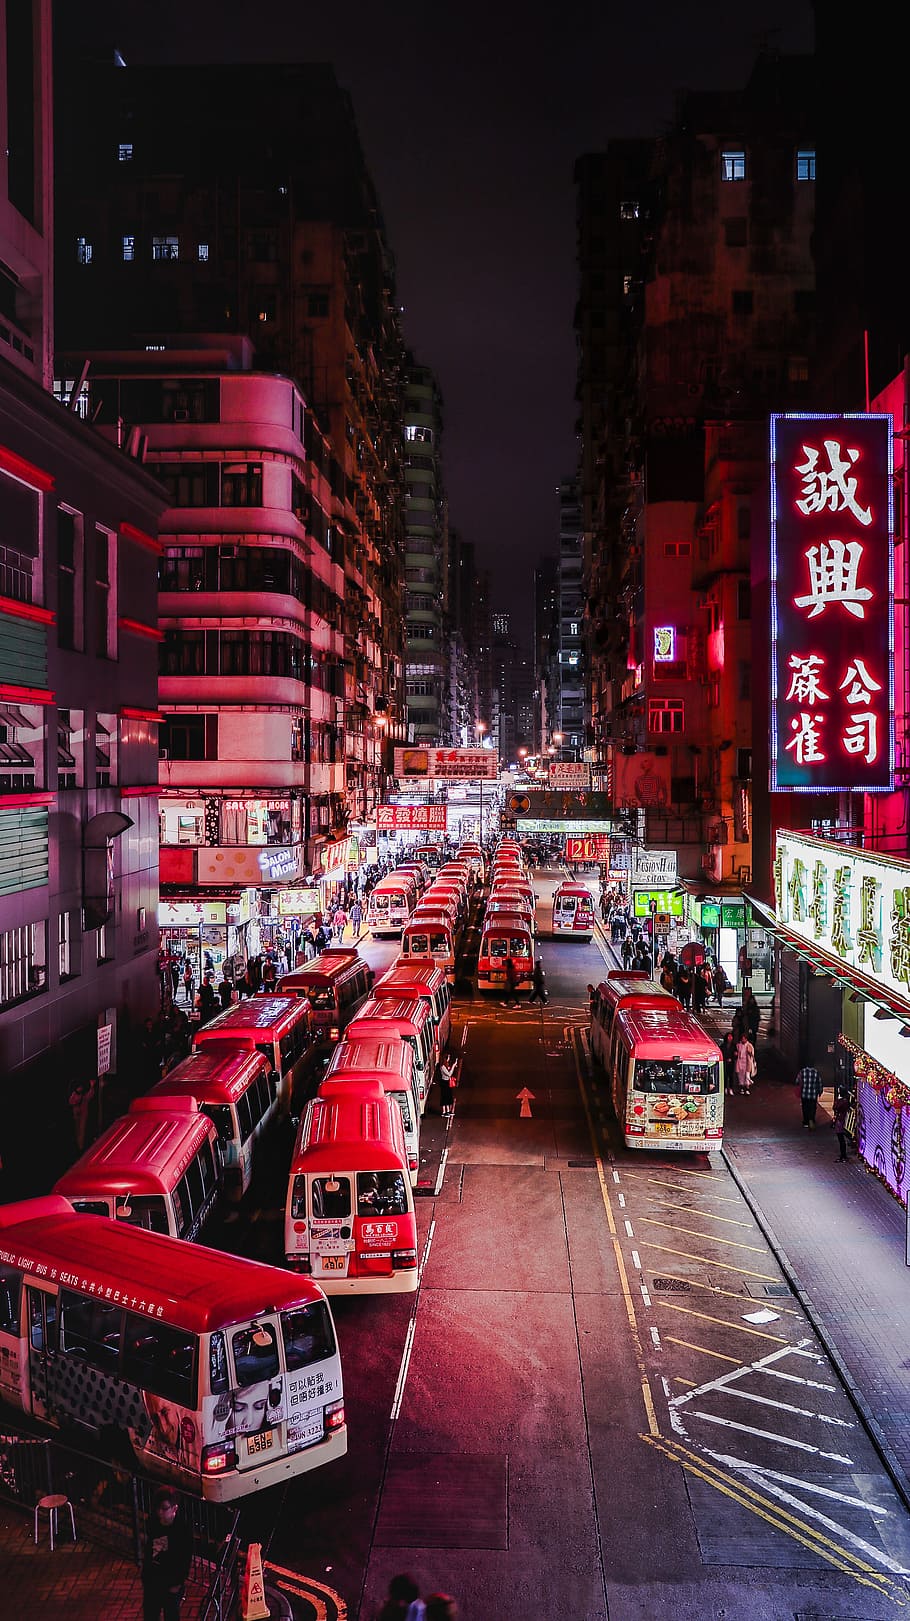 Hd Wallpaper Red And White Bus Neon Traffic Busy Crowd Road City Night Wallpaper Flare